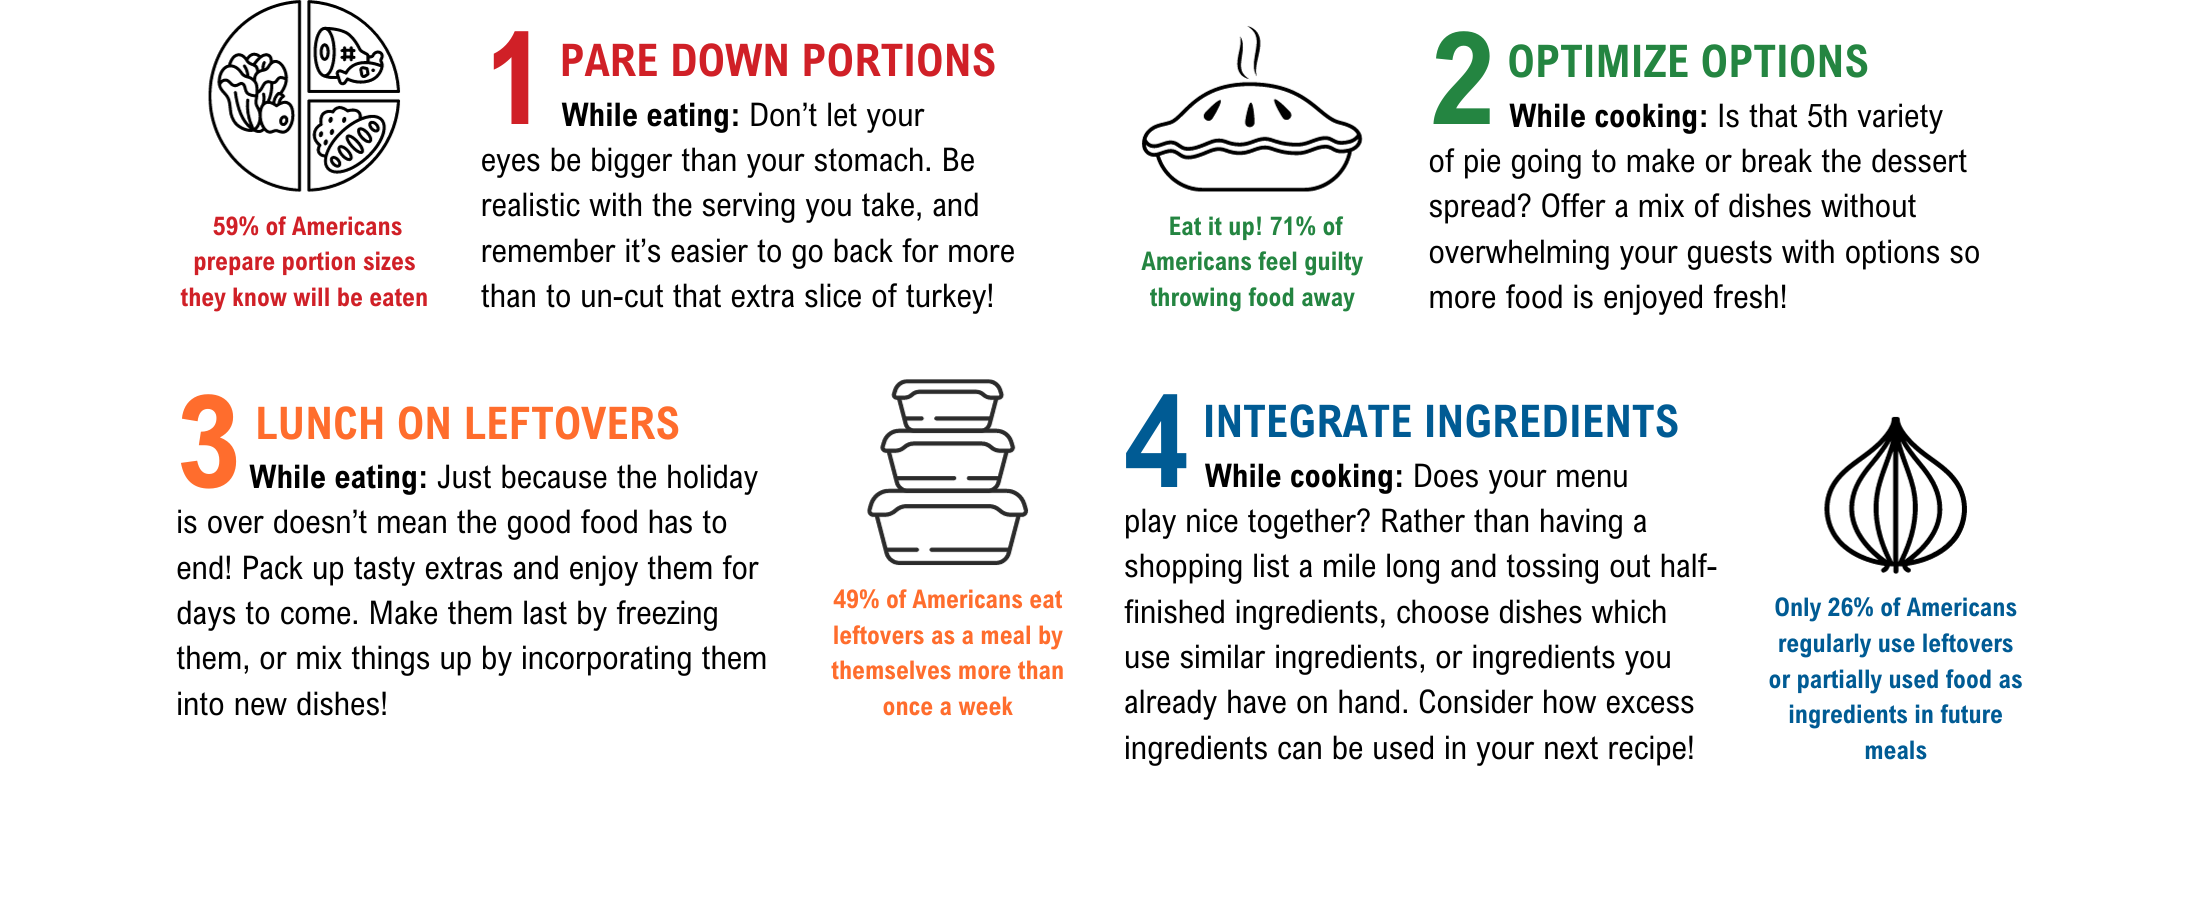 Holiday food saver tips, with decorative graphics of food portions, pie, leftover dishes and an onion.